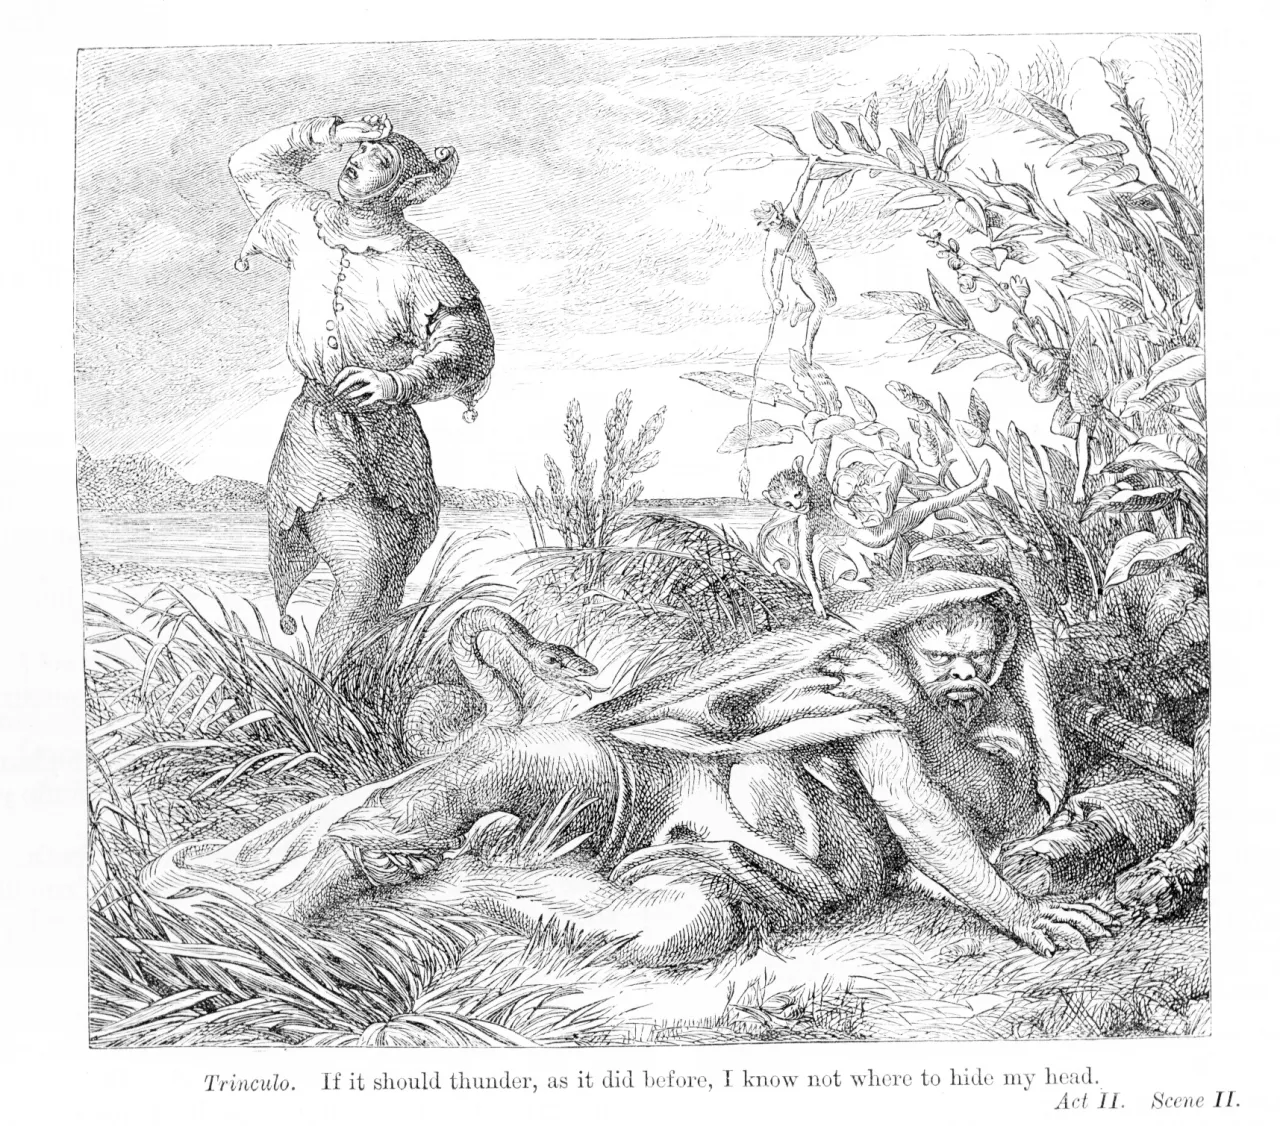 An engraving of an angsty person while a snake menaces a hairy biped in the grass